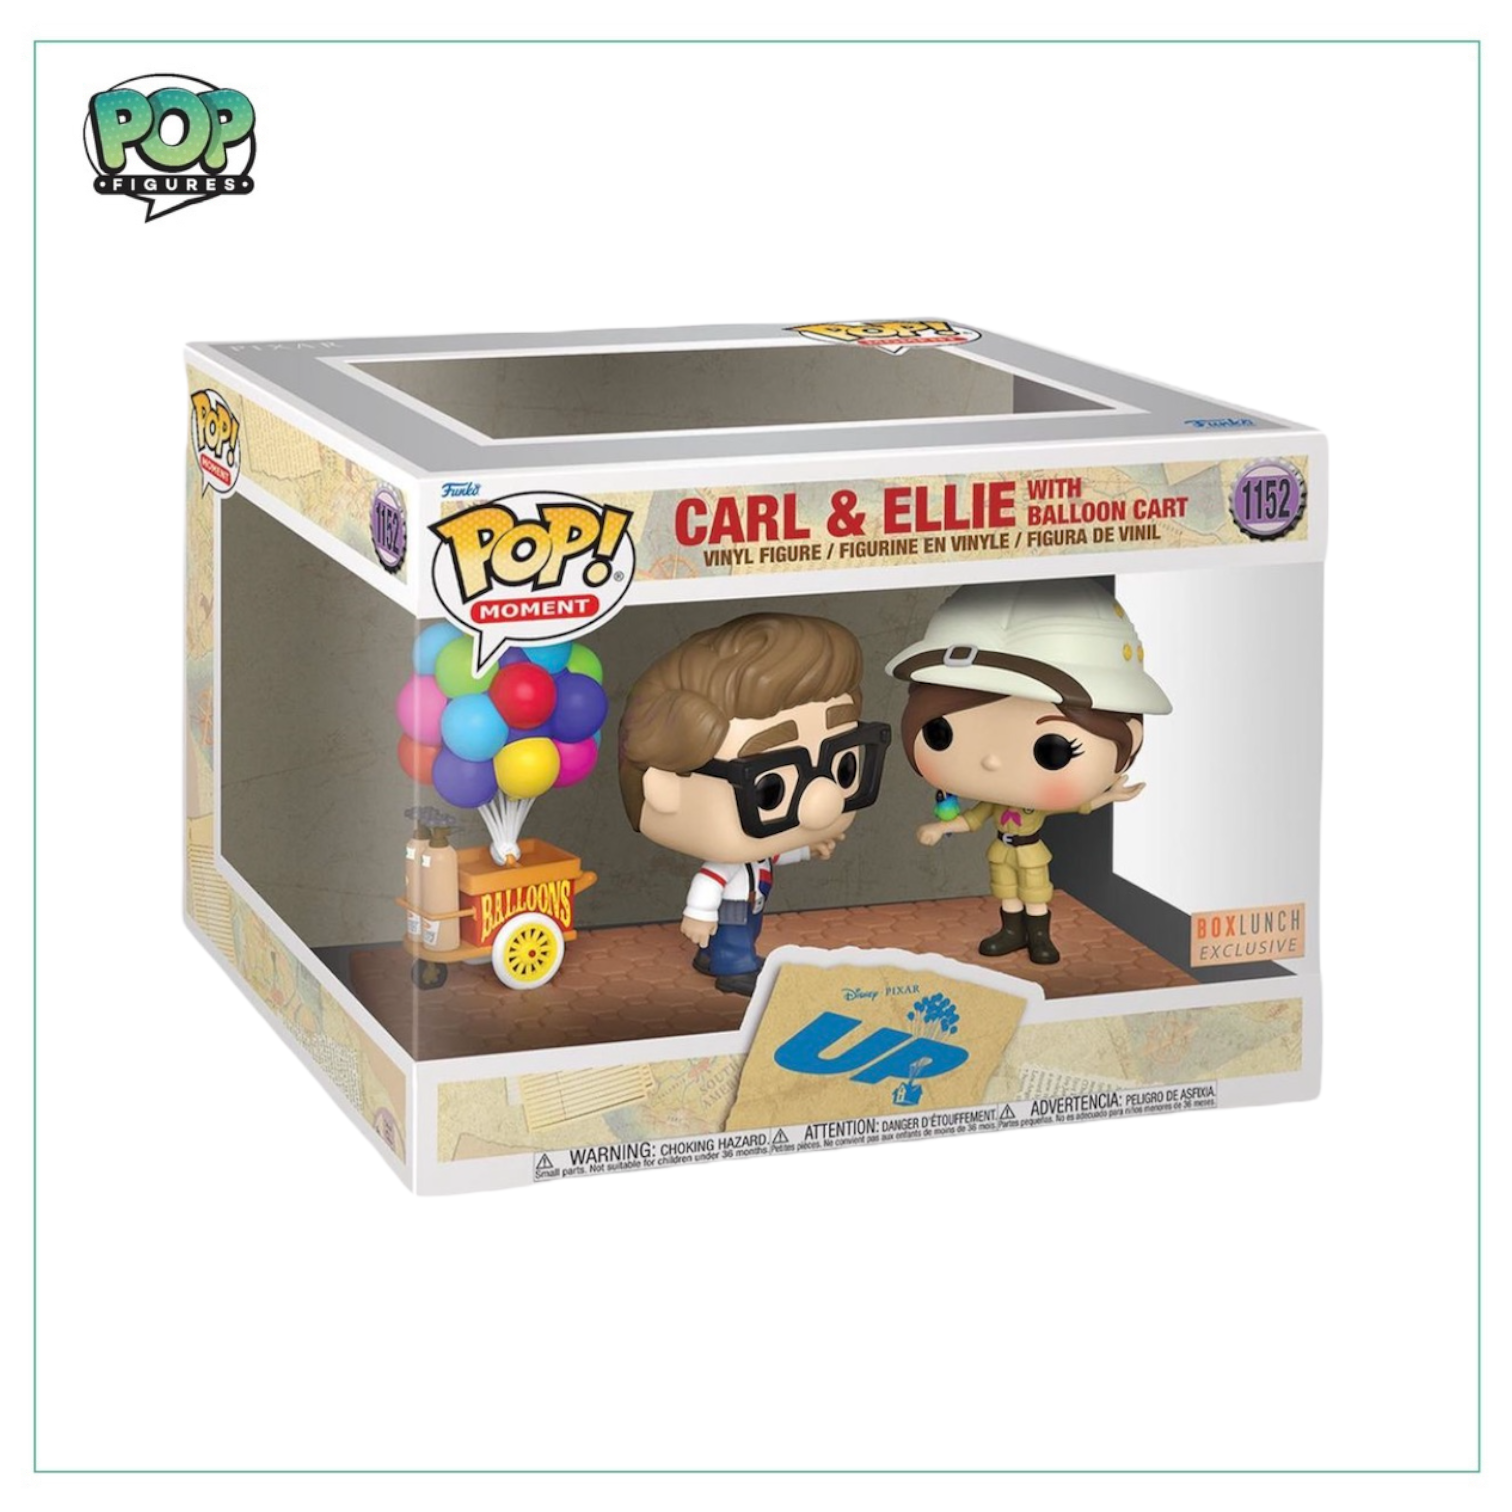 Carl & Ellie With Balloon Cart #1152 Deluxe Funko Pop! - UP -  Box Lunch Exclusive